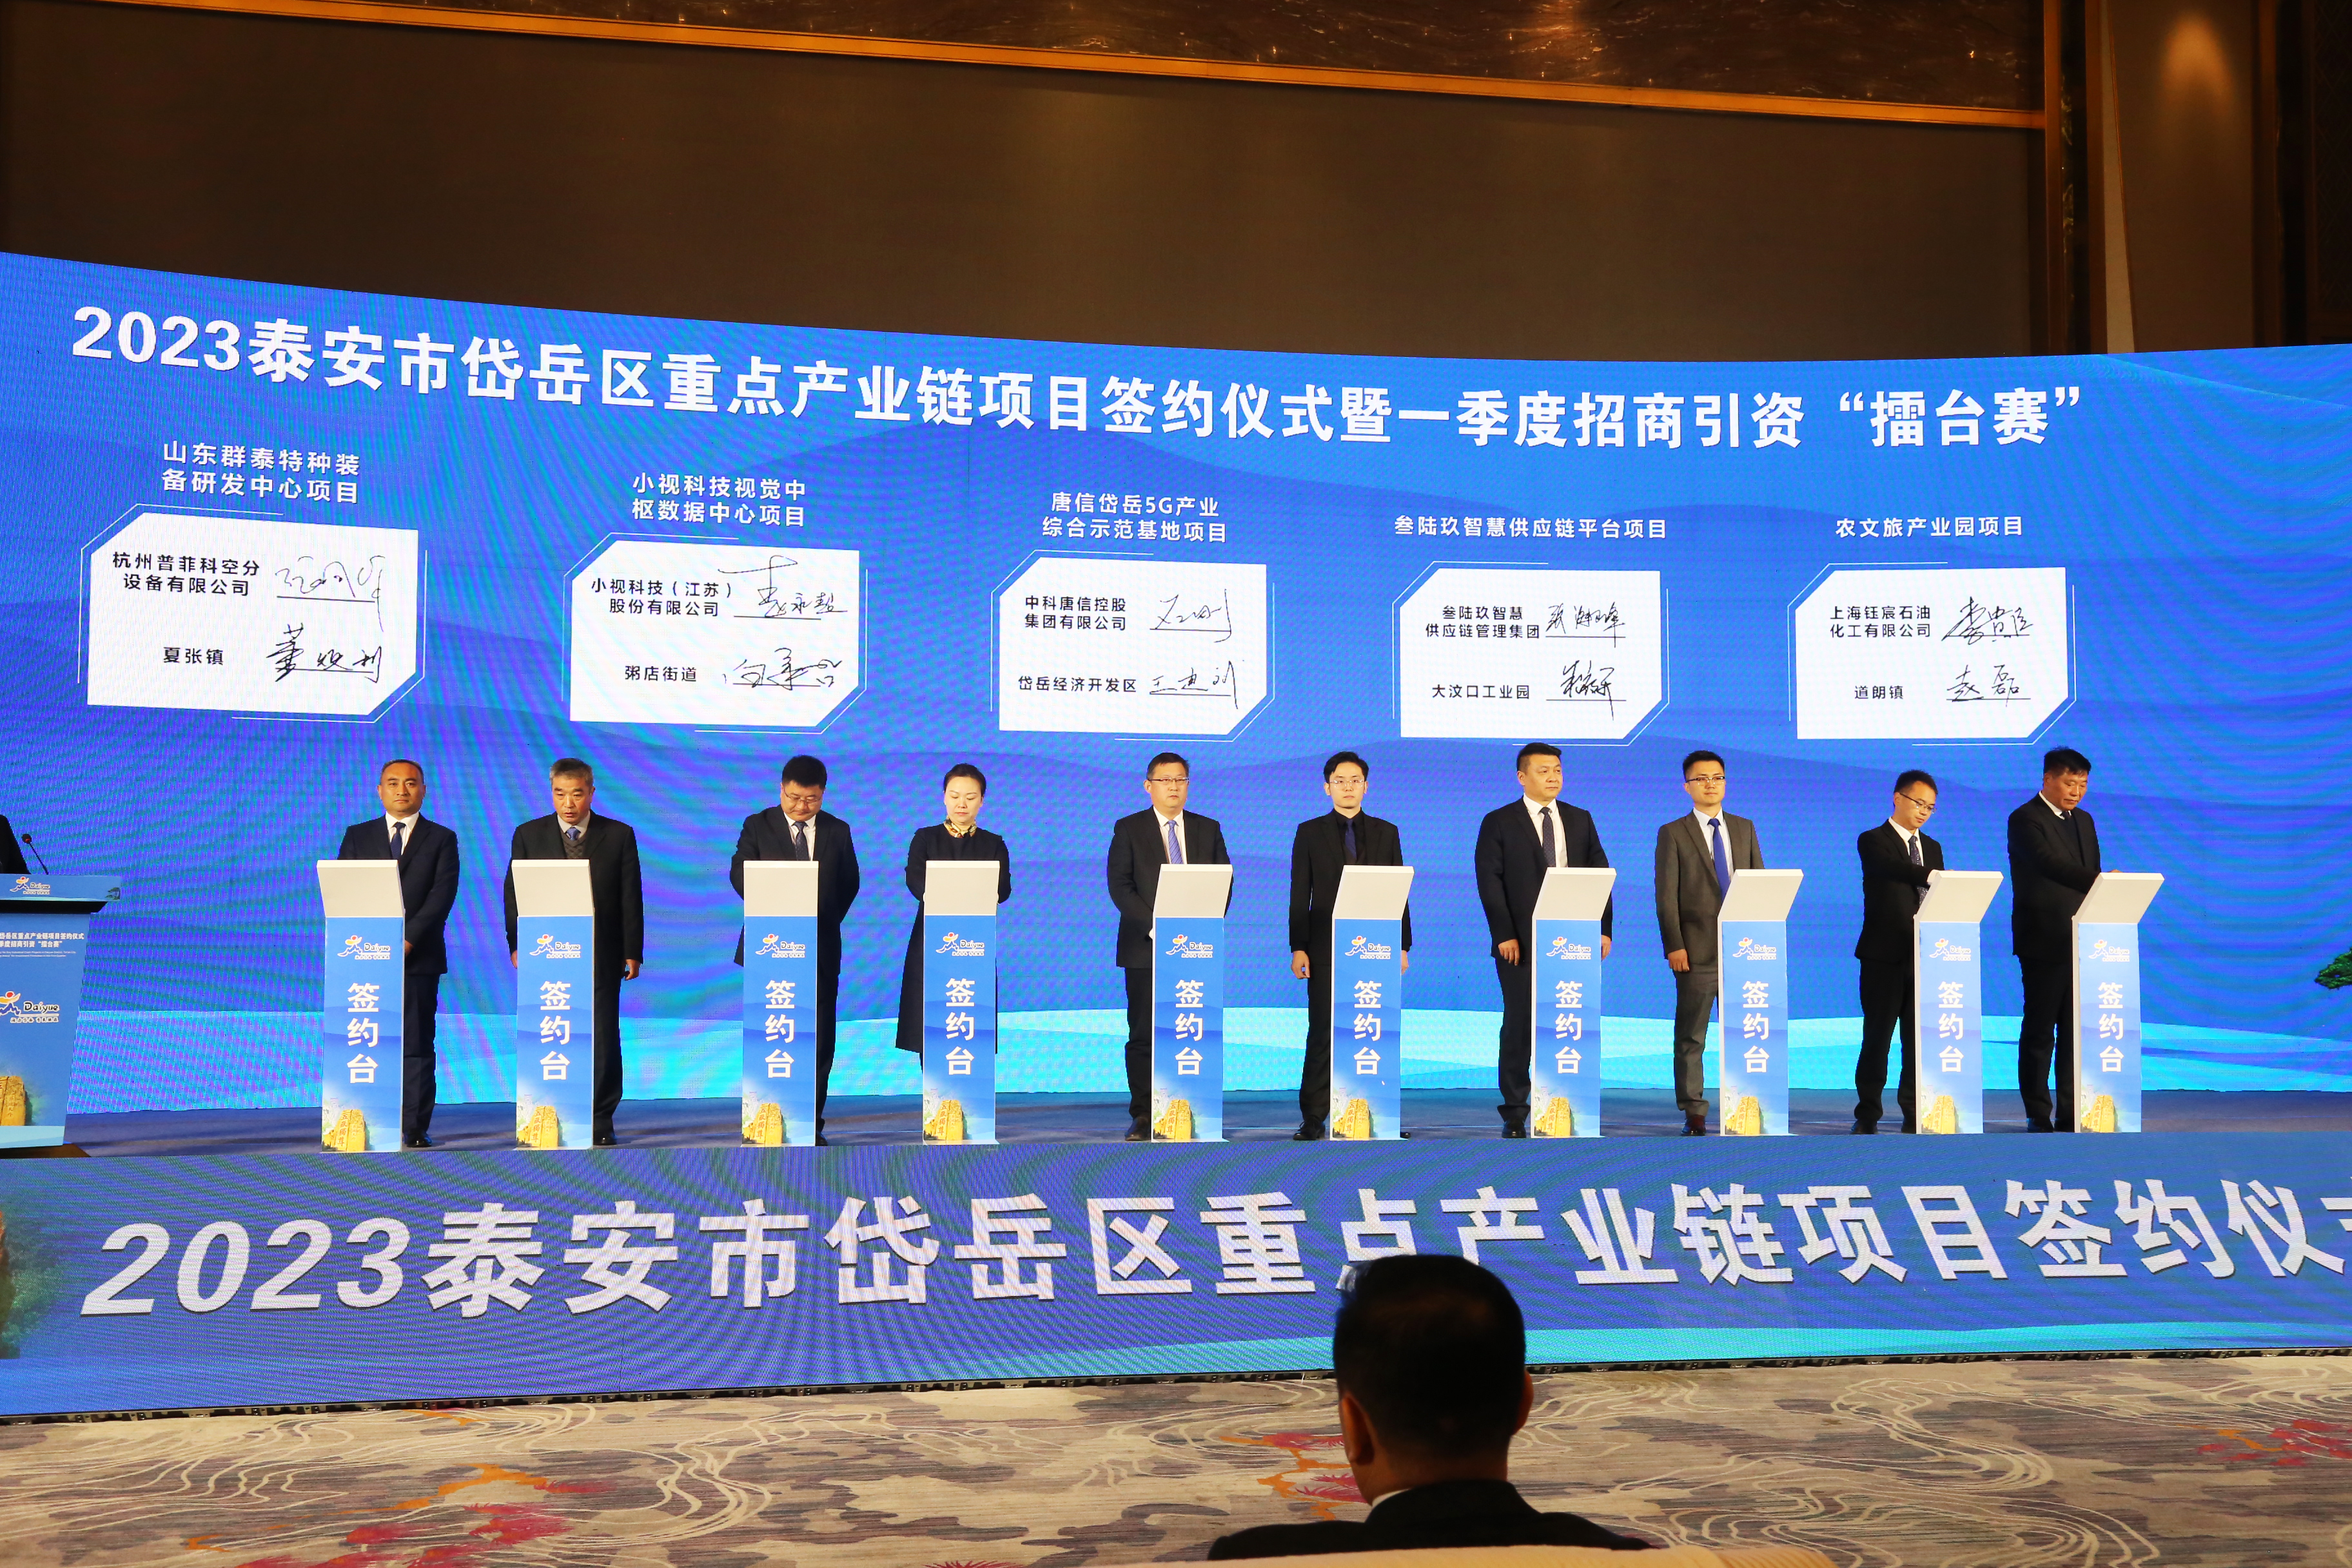 Tai'an Daiyue District Accelerates Investment Promotion and Xiaoshi Technology Empowers Industrial Upgrading in the Whole District